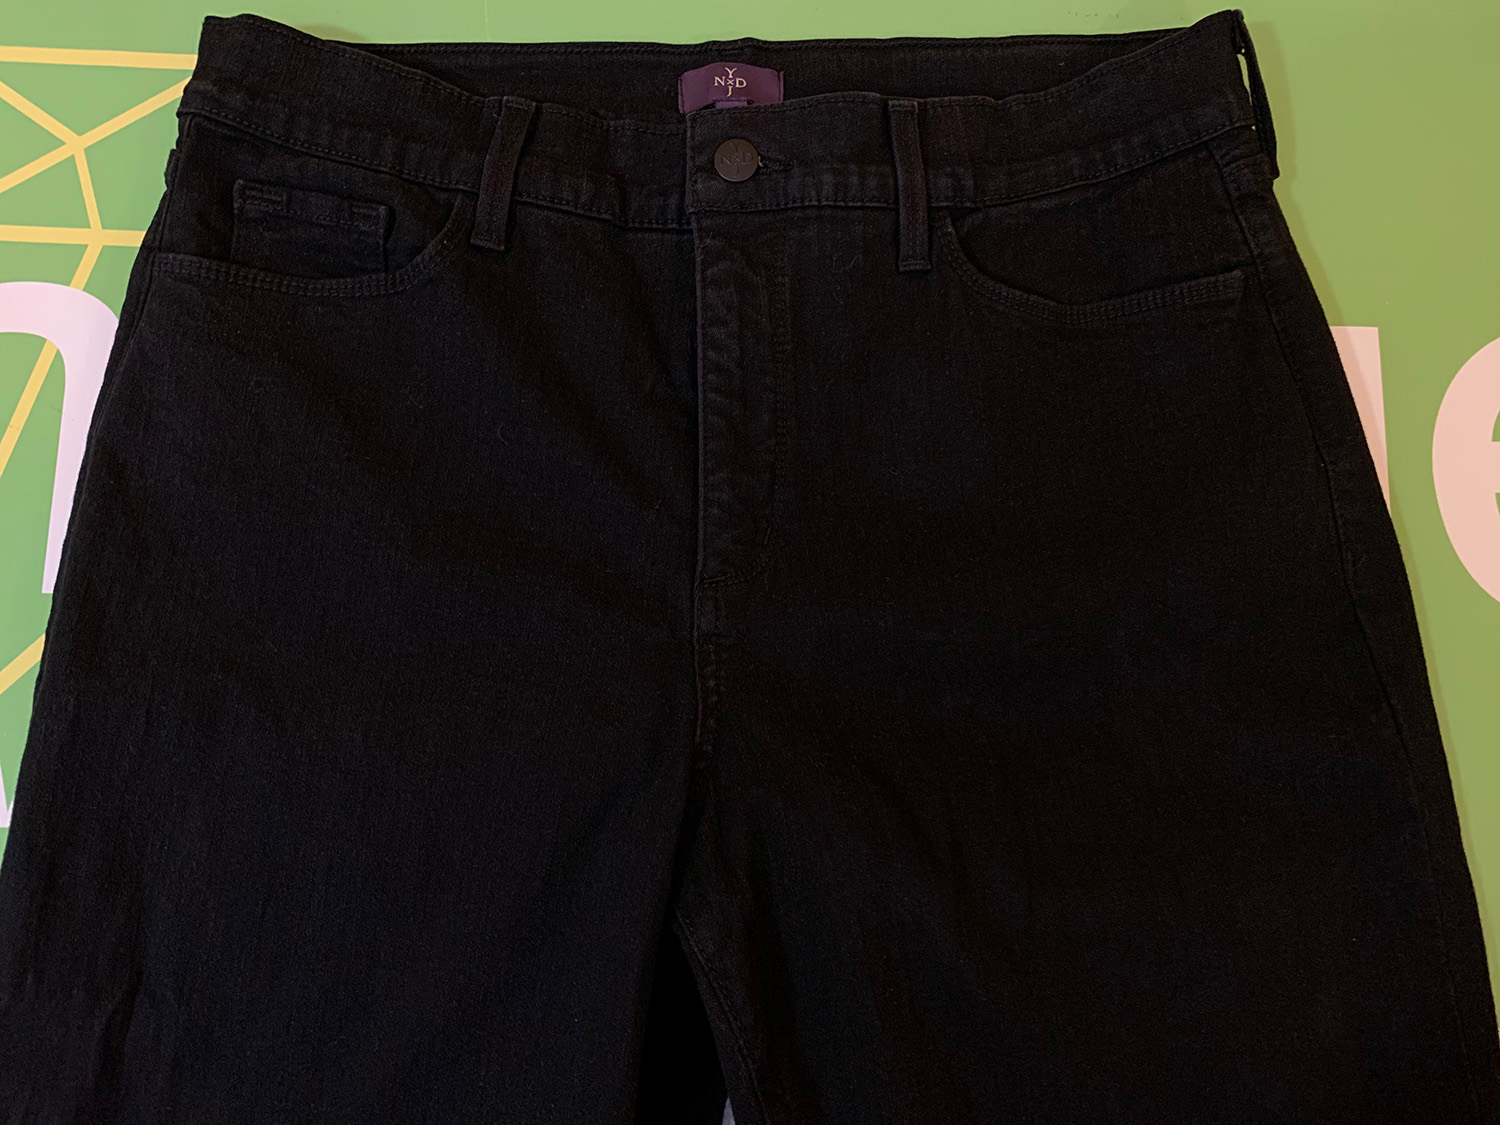 NYDJ Not Your Daughters Jeans Womens Straight Black Jeans Size 14